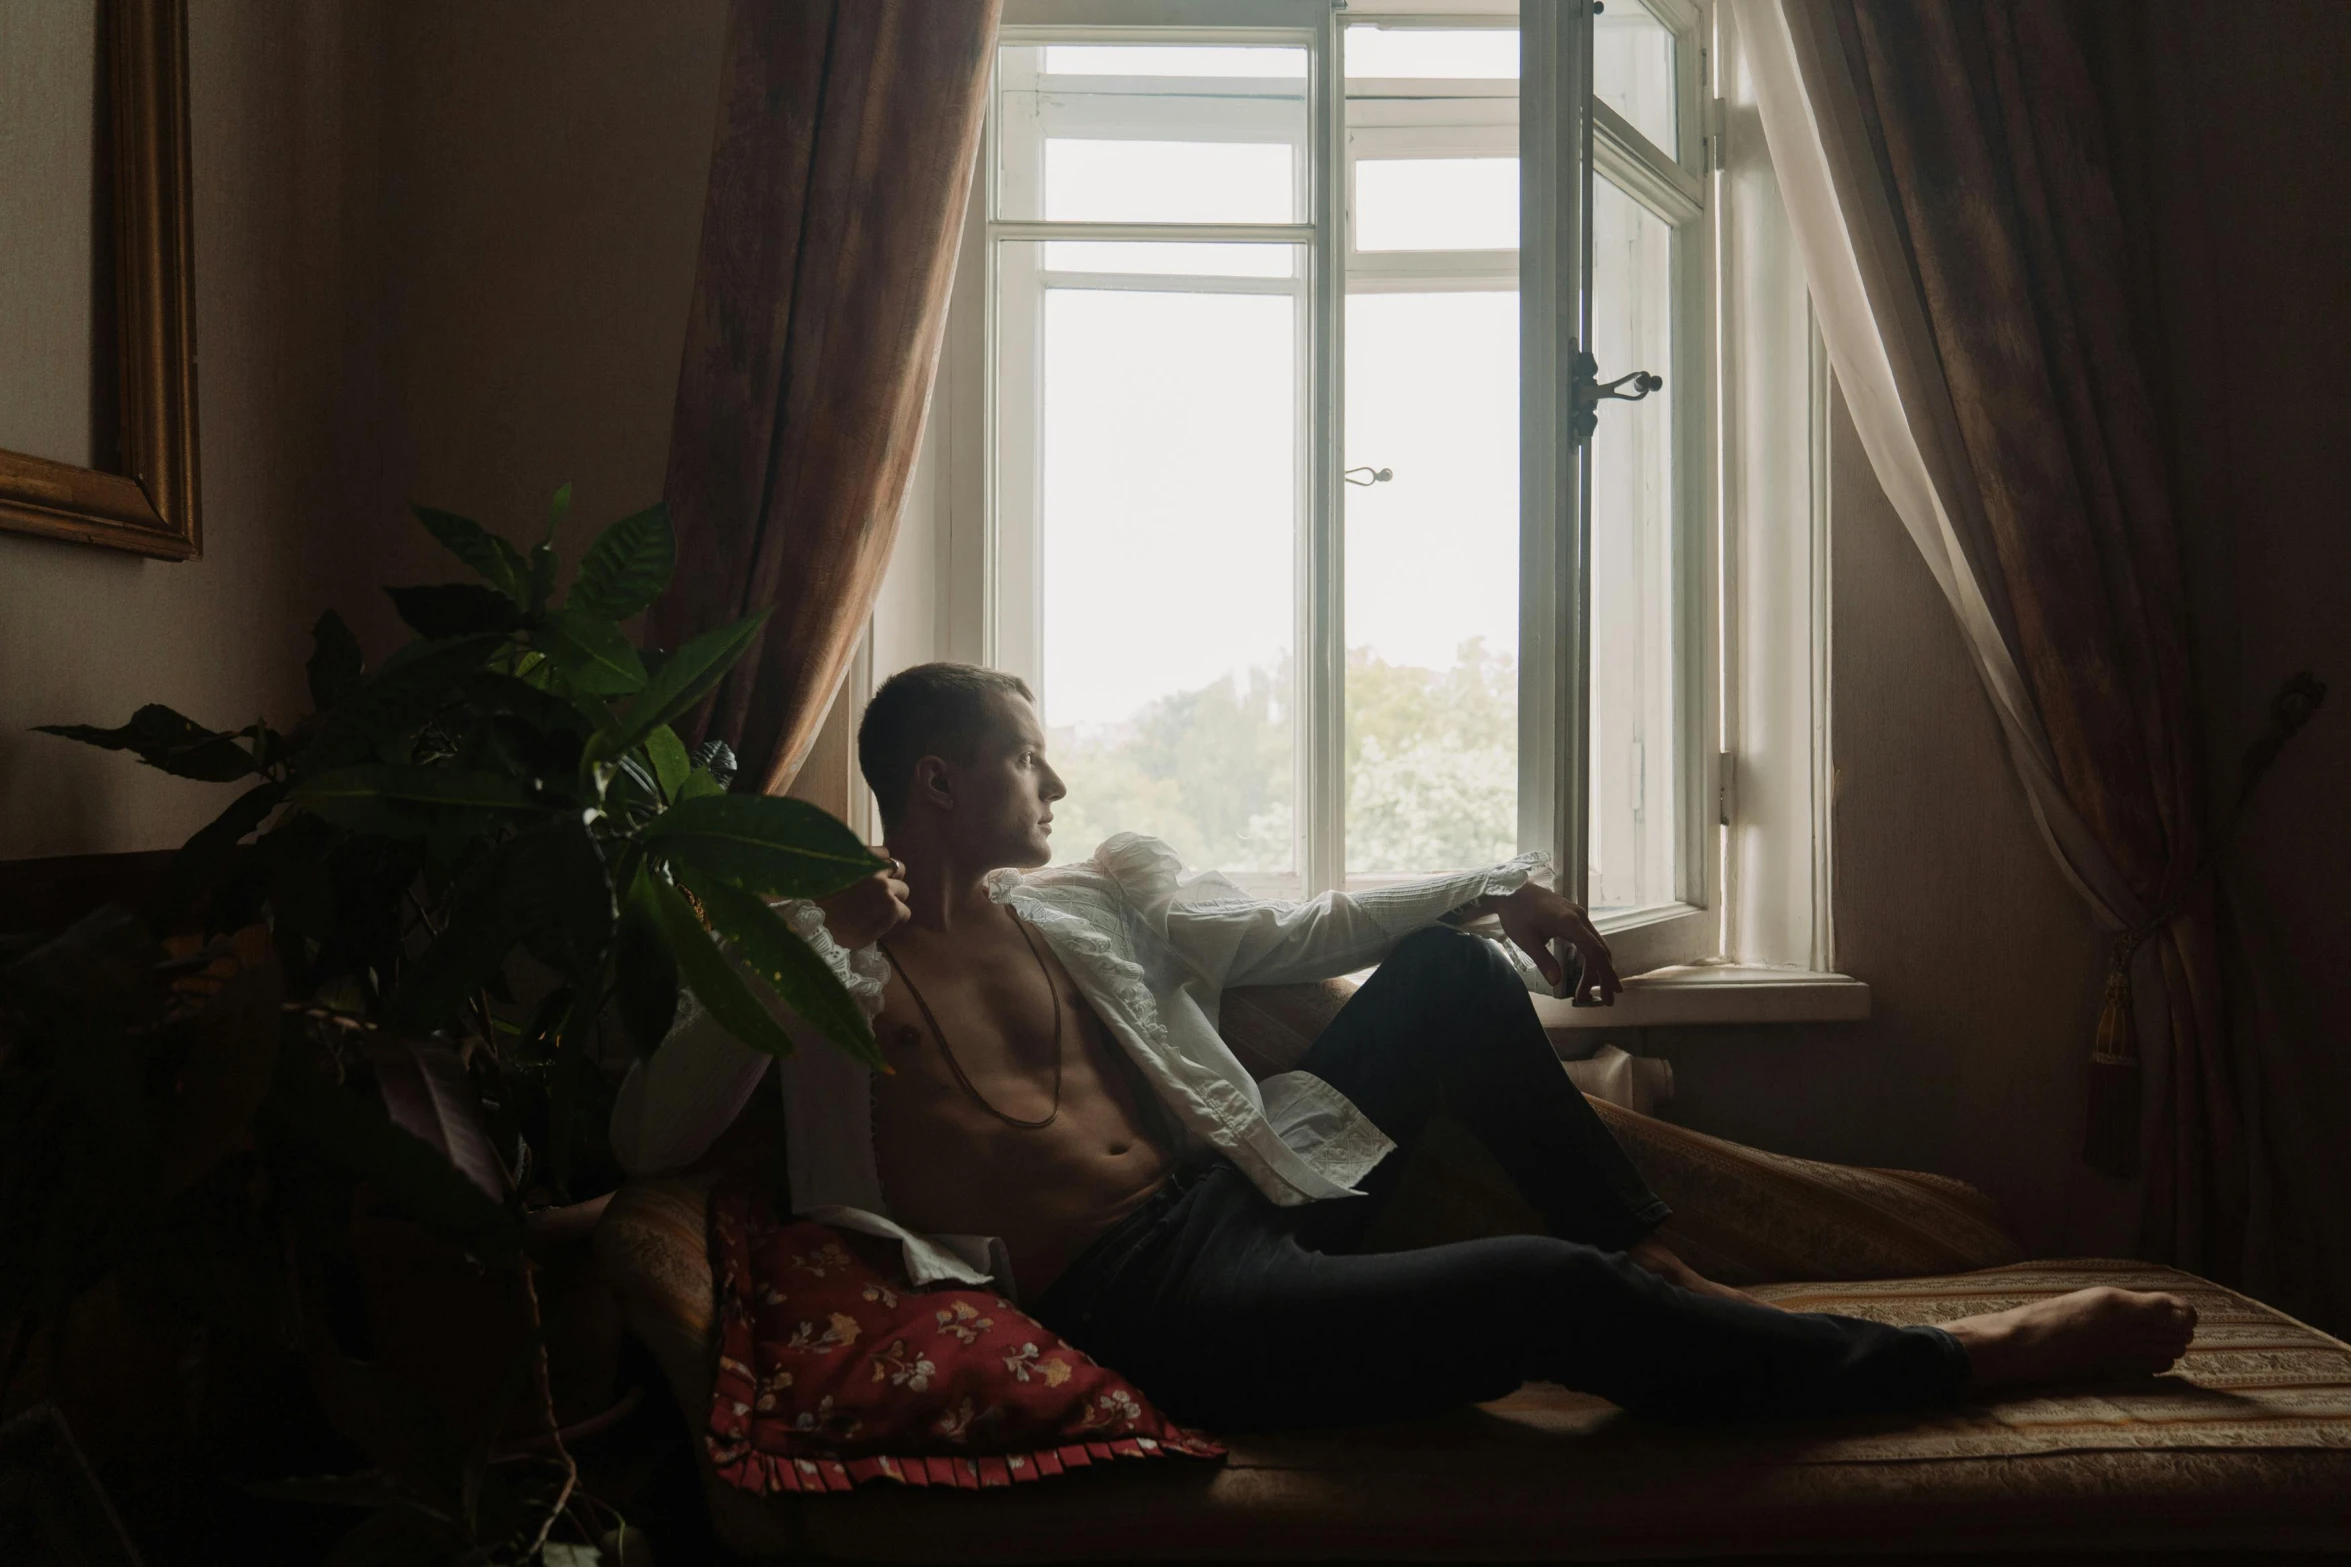 a man sitting on top of a bed next to a window, inspired by Elsa Bleda, vitalik buterin, relaxing on the couch, yulia nevskaya, lgbtq